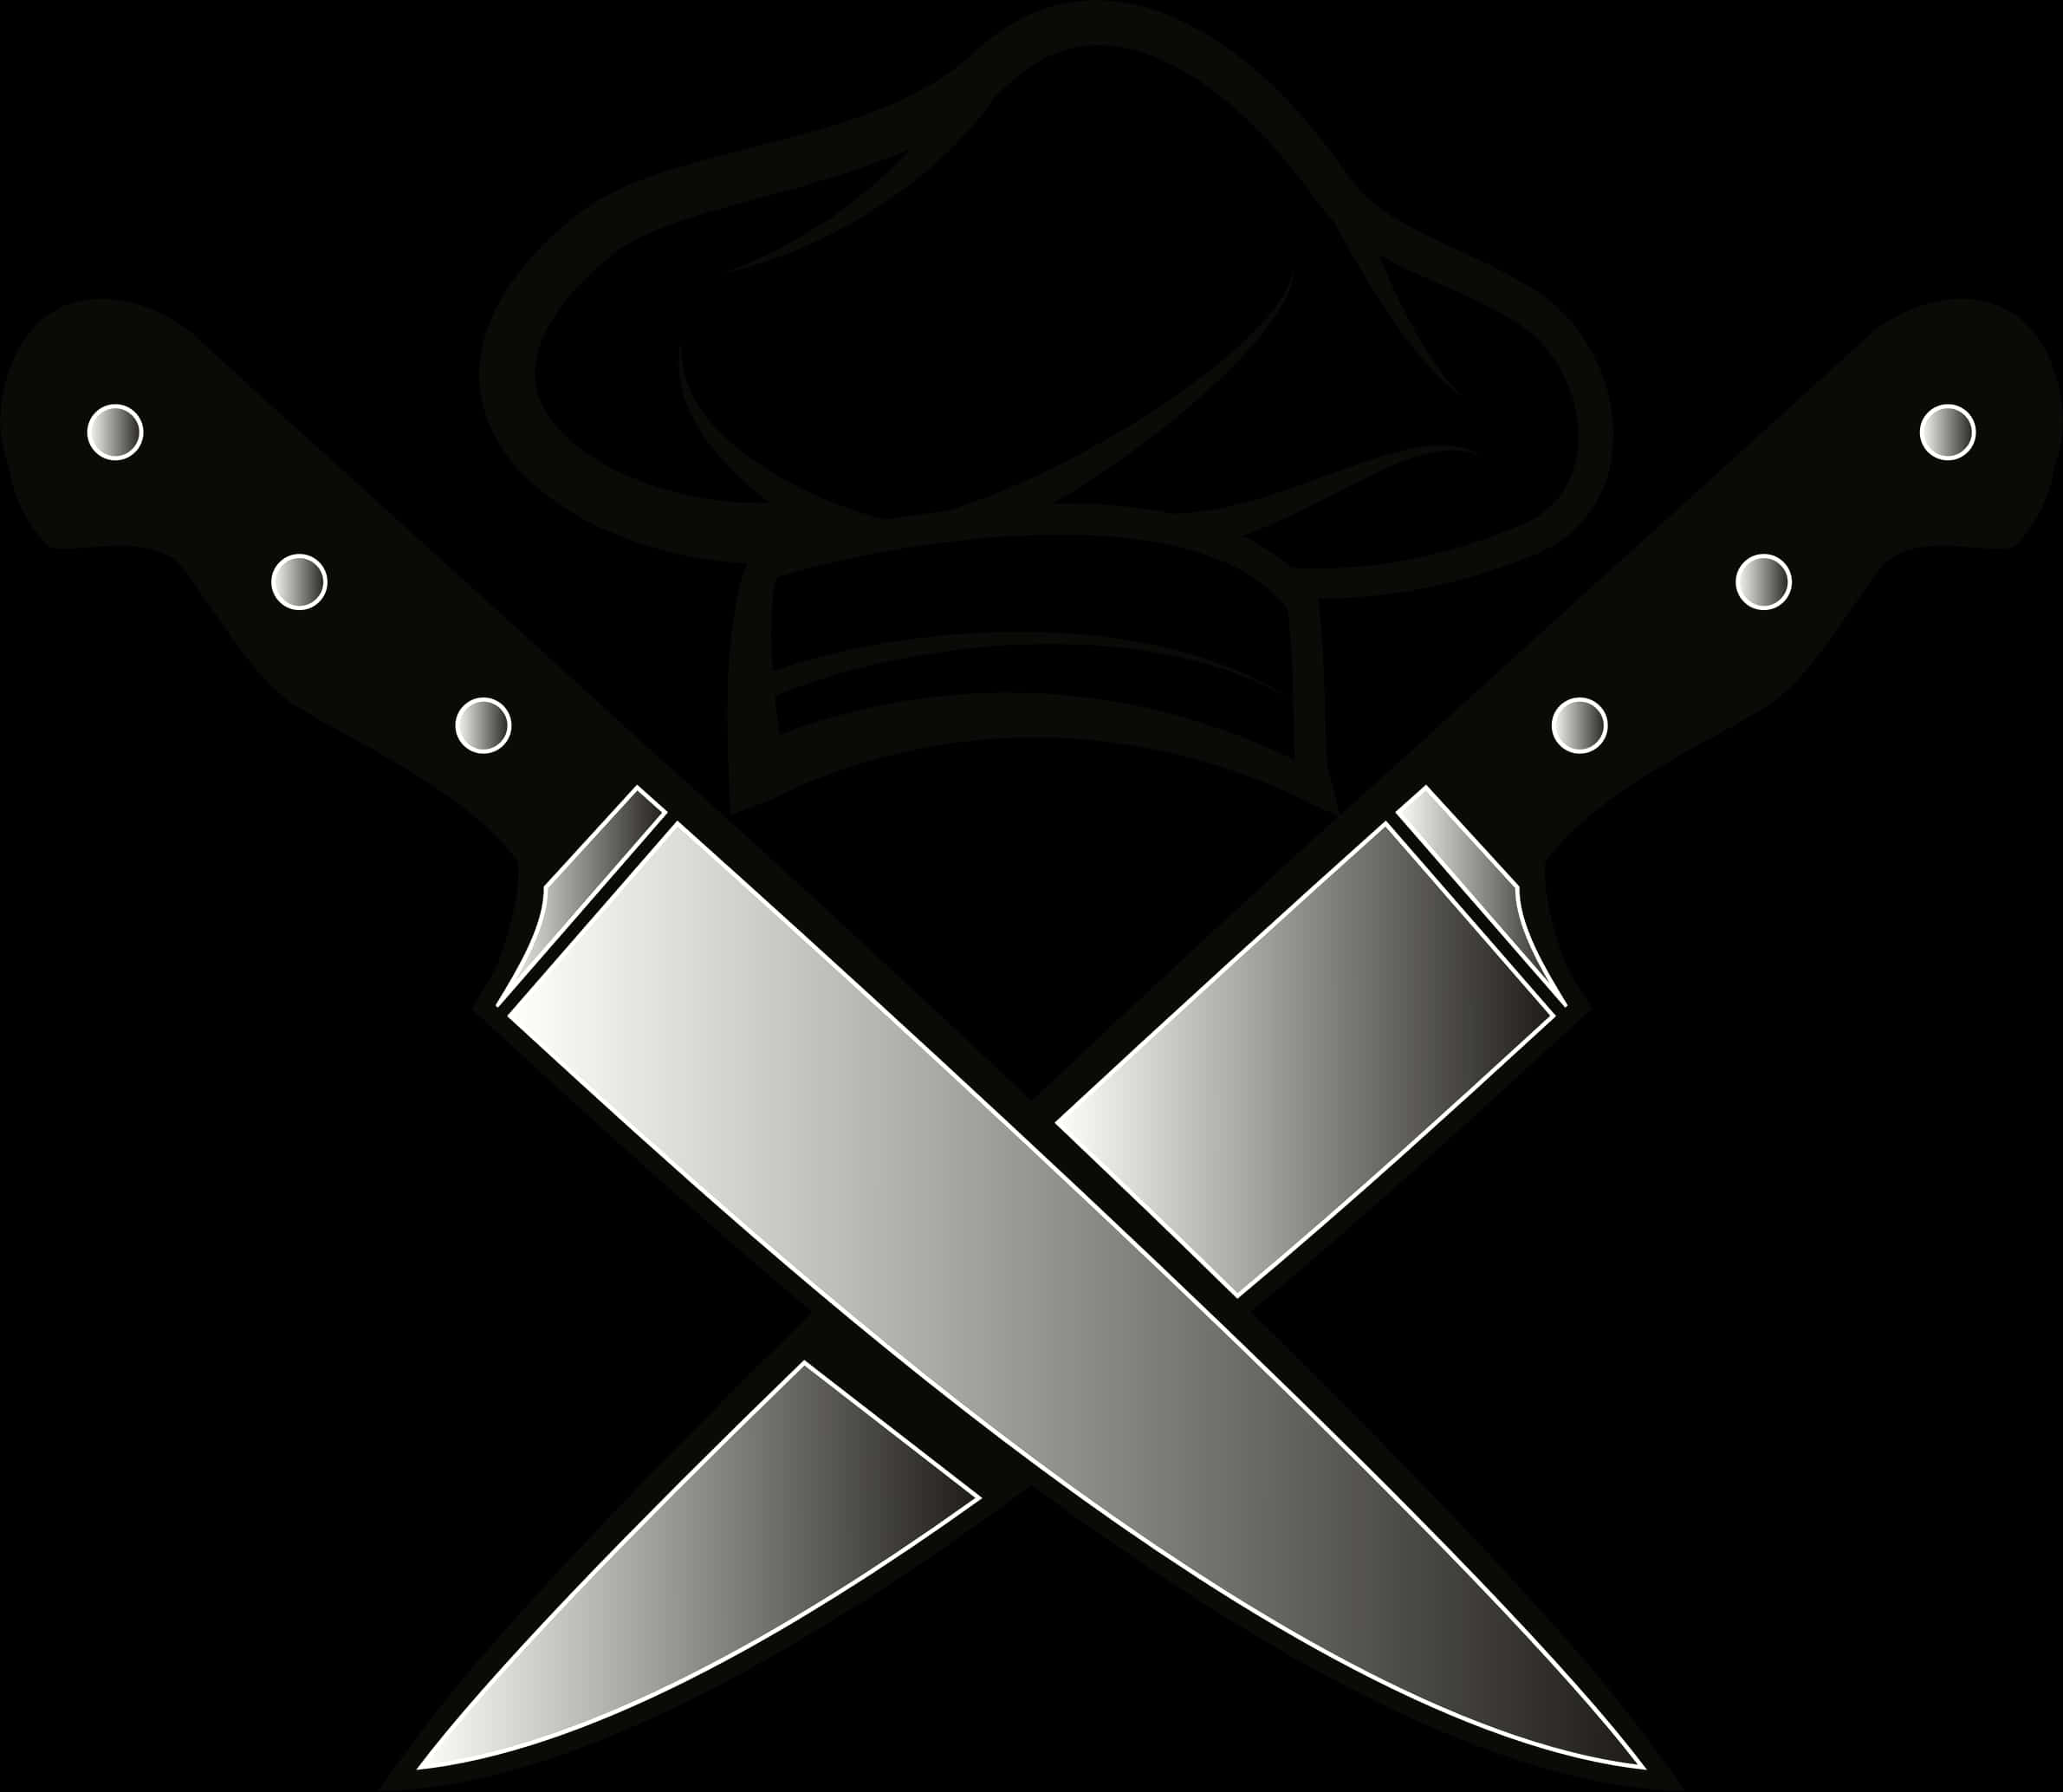 A Pair Of Knives Crossed